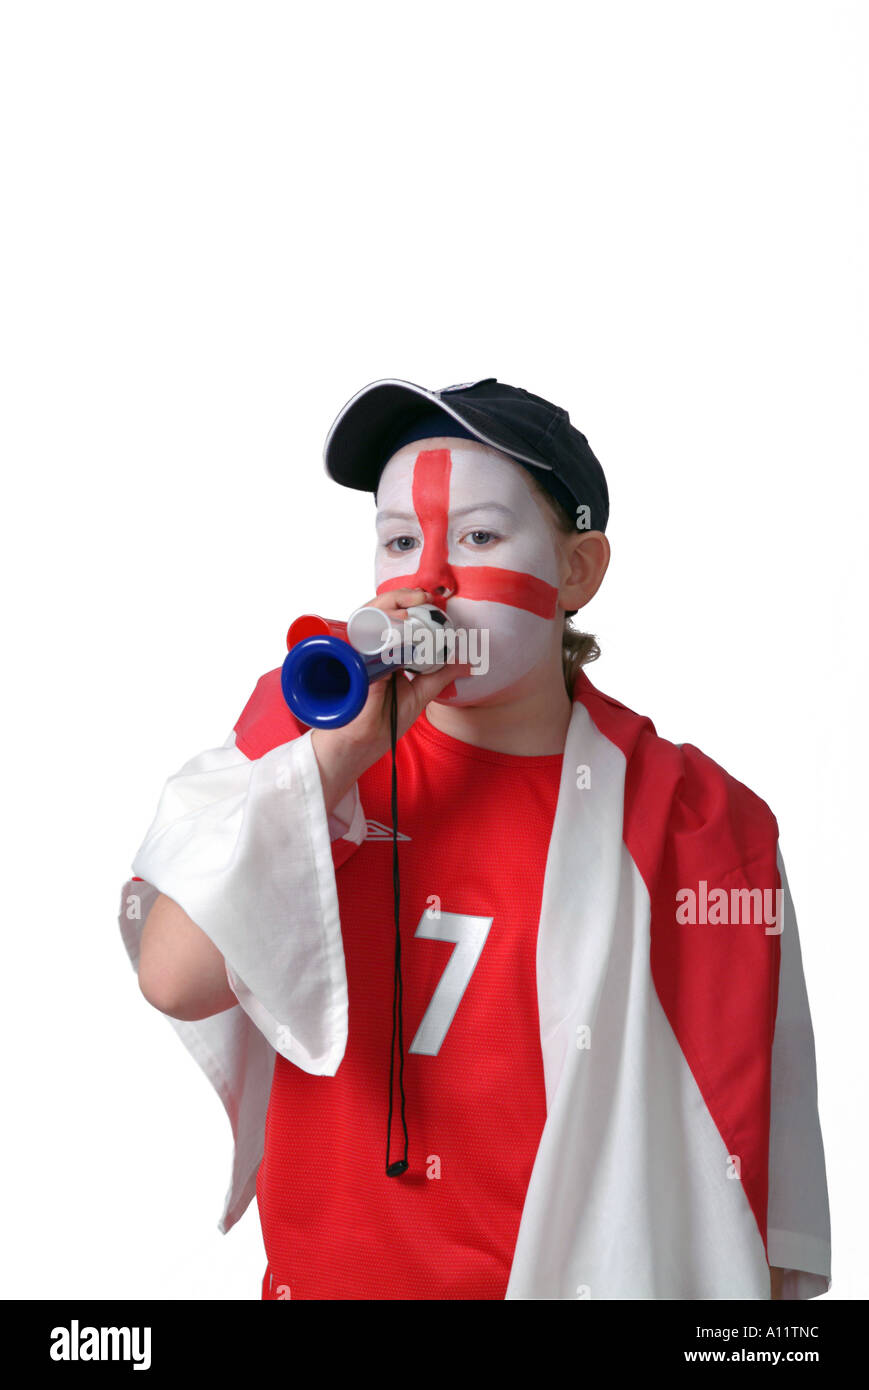 Angleterre football fan Banque D'Images